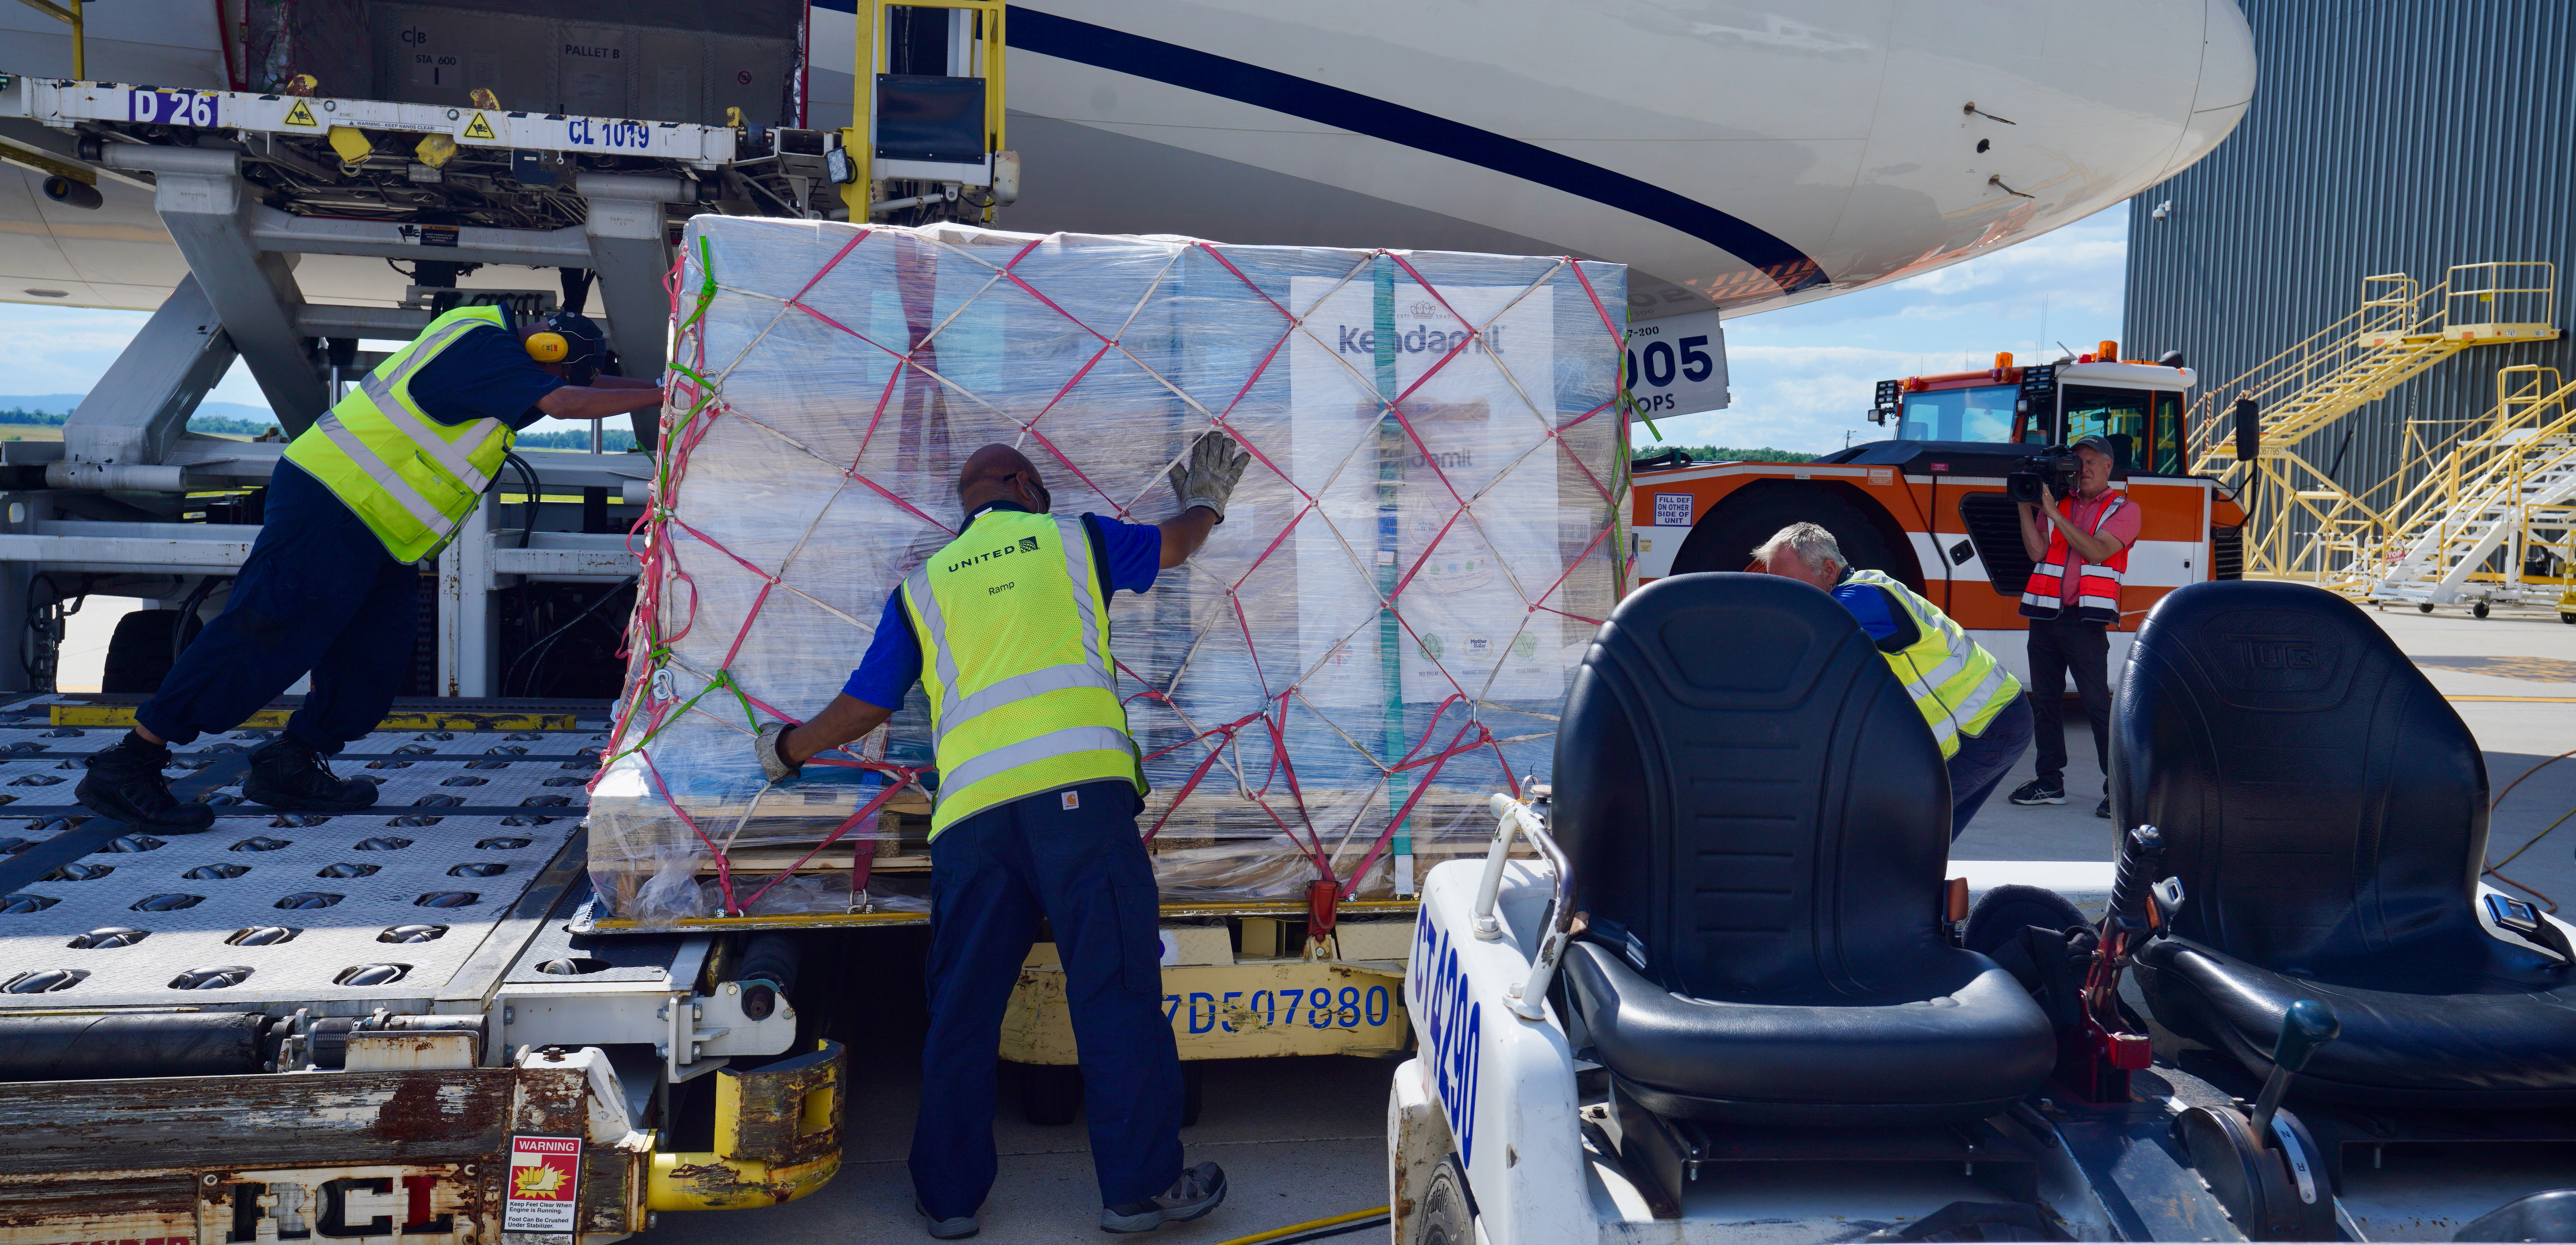 SNS Supplies being off loaded from a supply plane